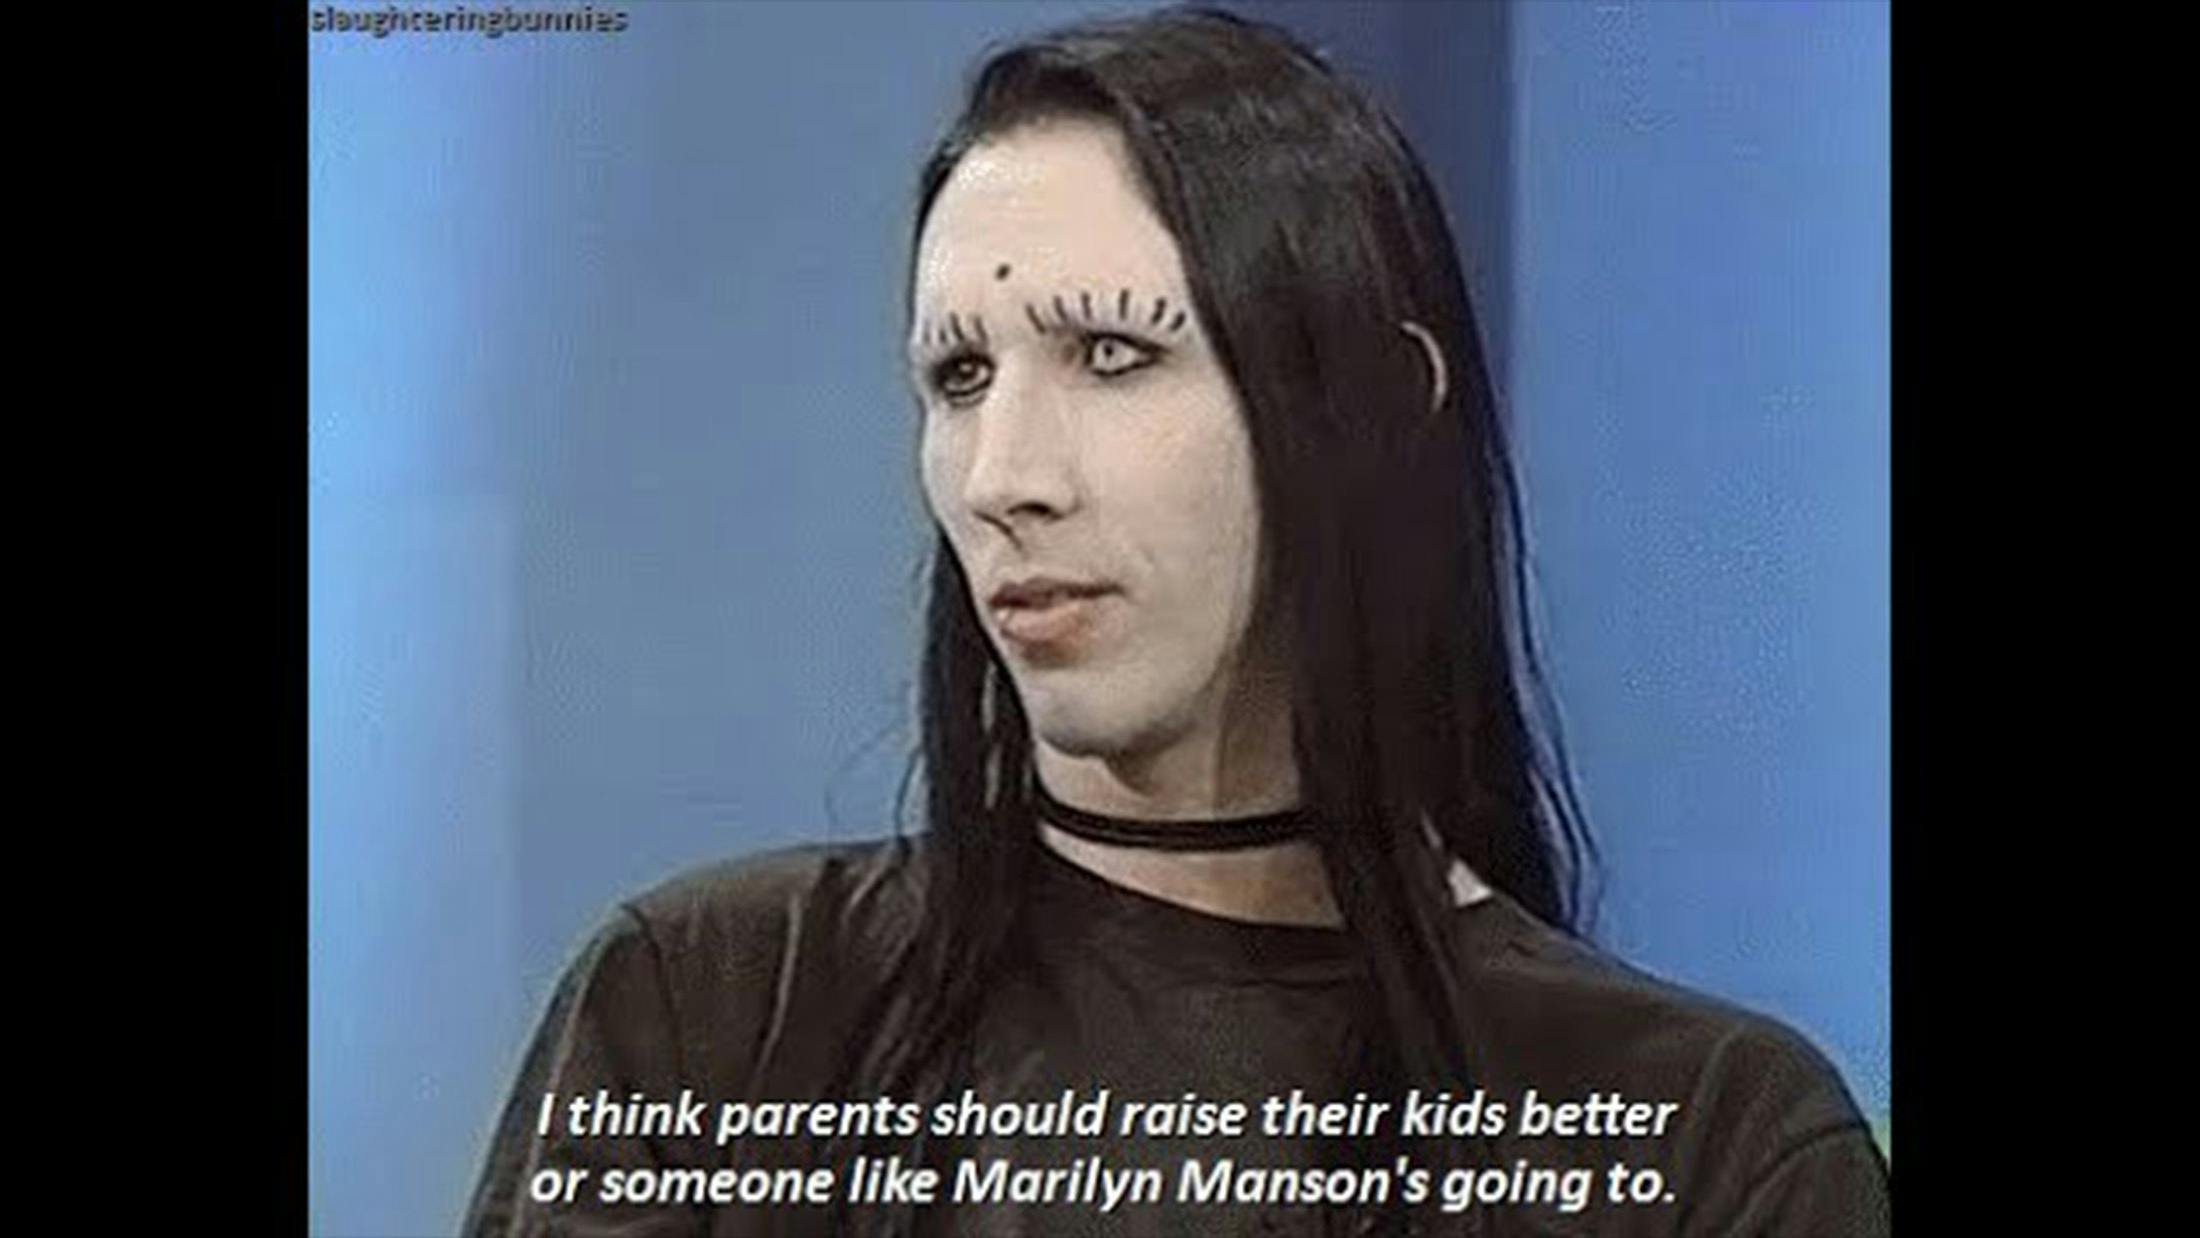 In 1995, The Phil Donahue Show was one of the most popular talk shows in America, and at the time metal was deemed as unholy or scary as drugs and alcohol. So, who better to talk about the subject than Marilyn Manson, who was already deemed a bad influence on audience members’ children? Remaining cool and collected throughout, Manson was bold enough to say, “I think it’s unfortunate that parents don’t know what their kids are doing. That disappoints me. I think parents should raise their kids better or someone like Marilyn Manson is going to.” Which is probably the most Marilyn Manson thing that he could've said.